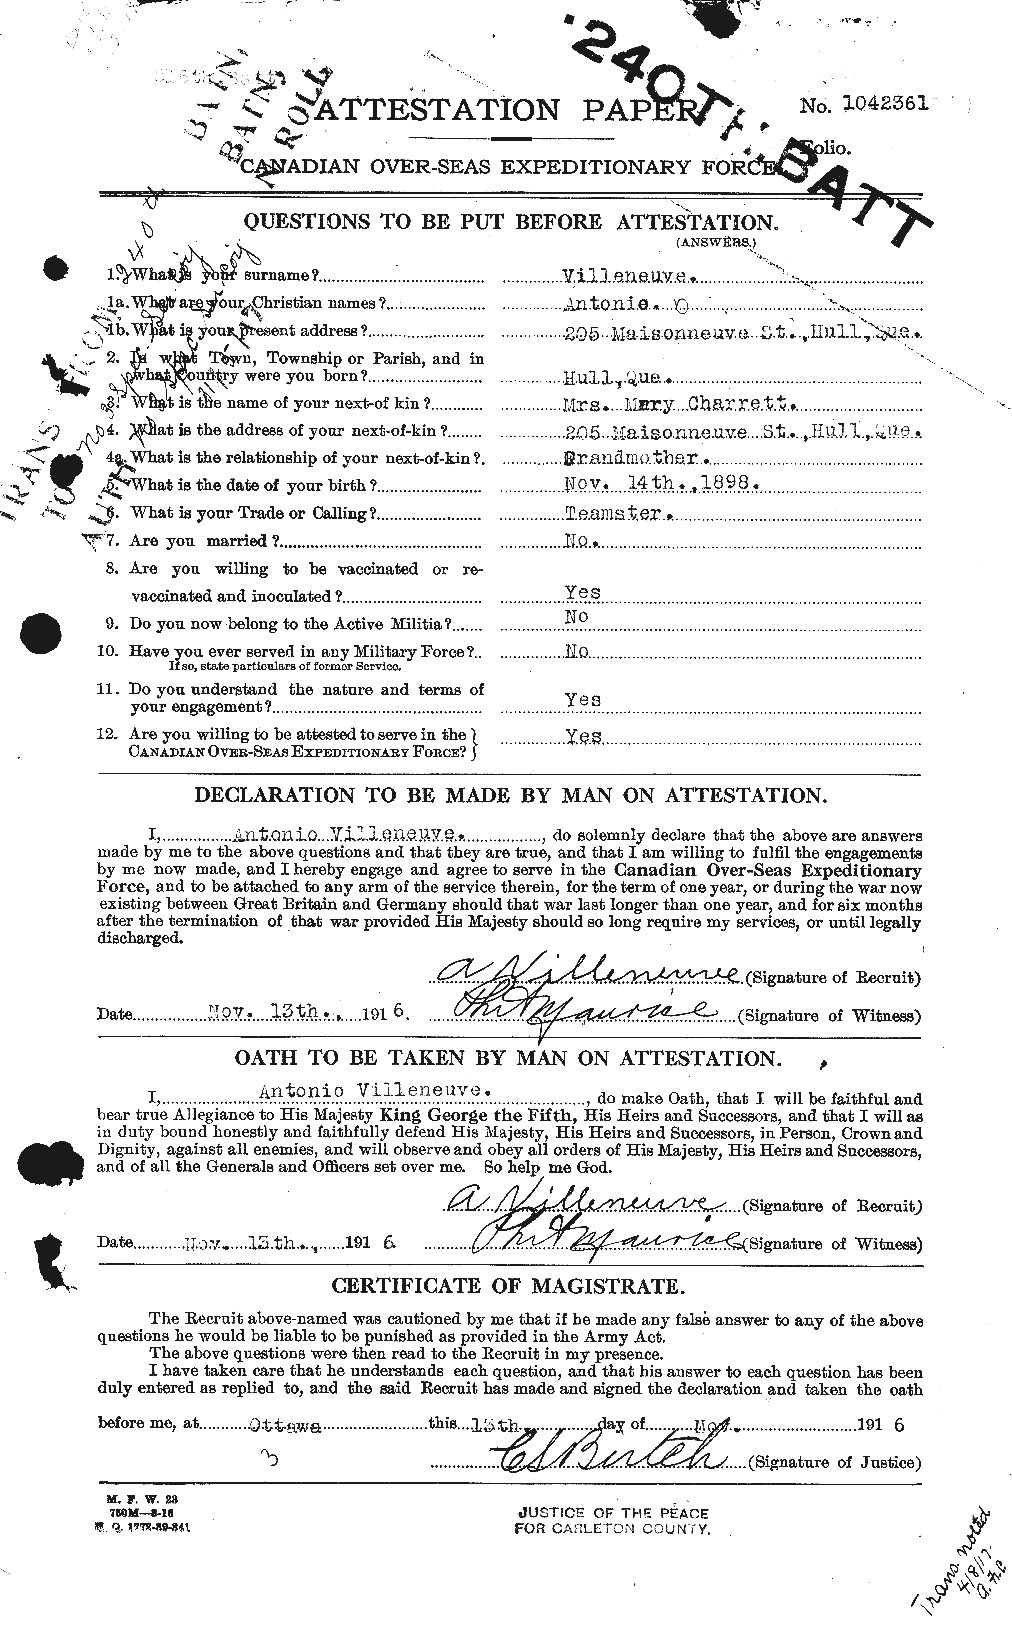 Personnel Records of the First World War - CEF 653790a